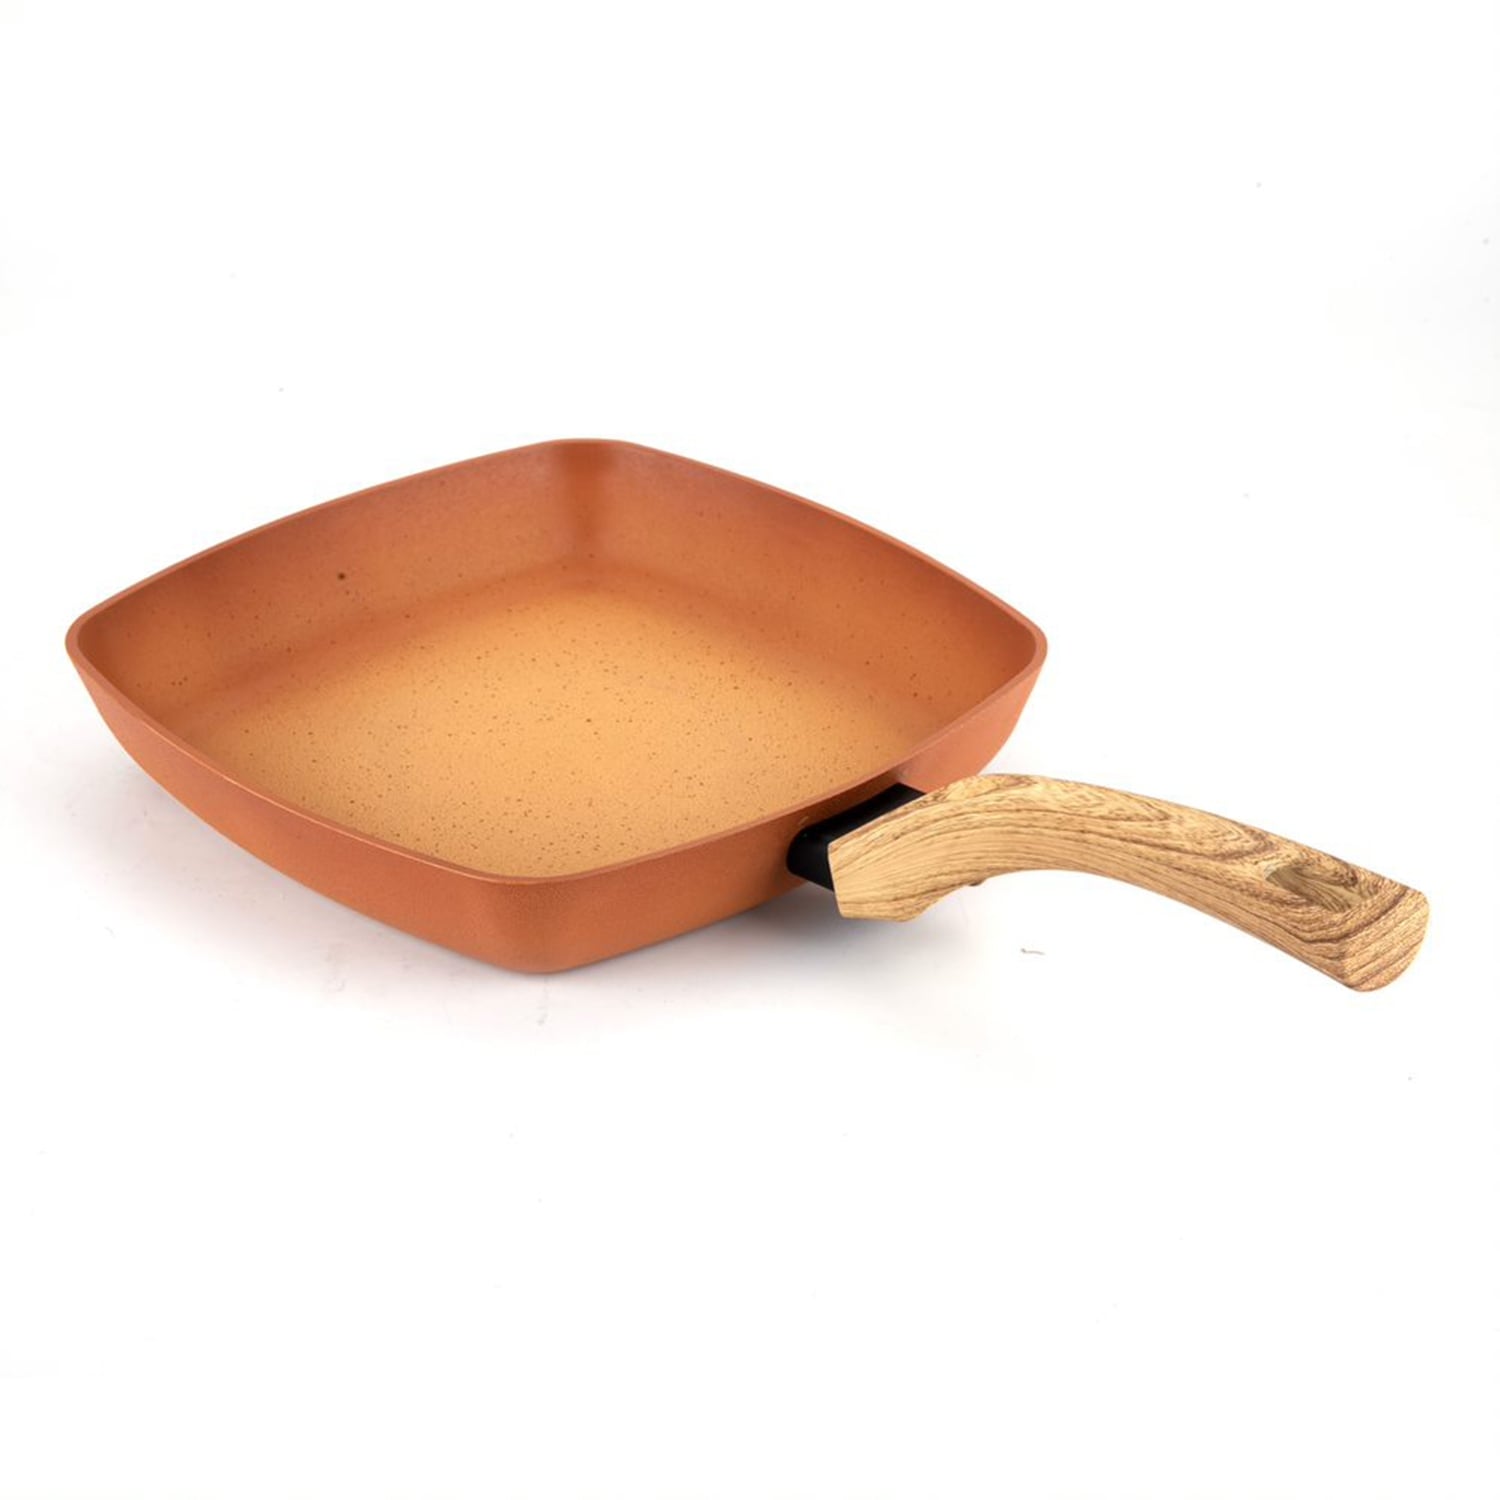 https://ak1.ostkcdn.com/images/products/is/images/direct/fc71790d908eab8223491fd2d294539fa73a8219/Hamilton-Beach-11-Inch-Forged-Aluminum-Terracotta-Nonstick-Coated-Griddle-Pan.jpg